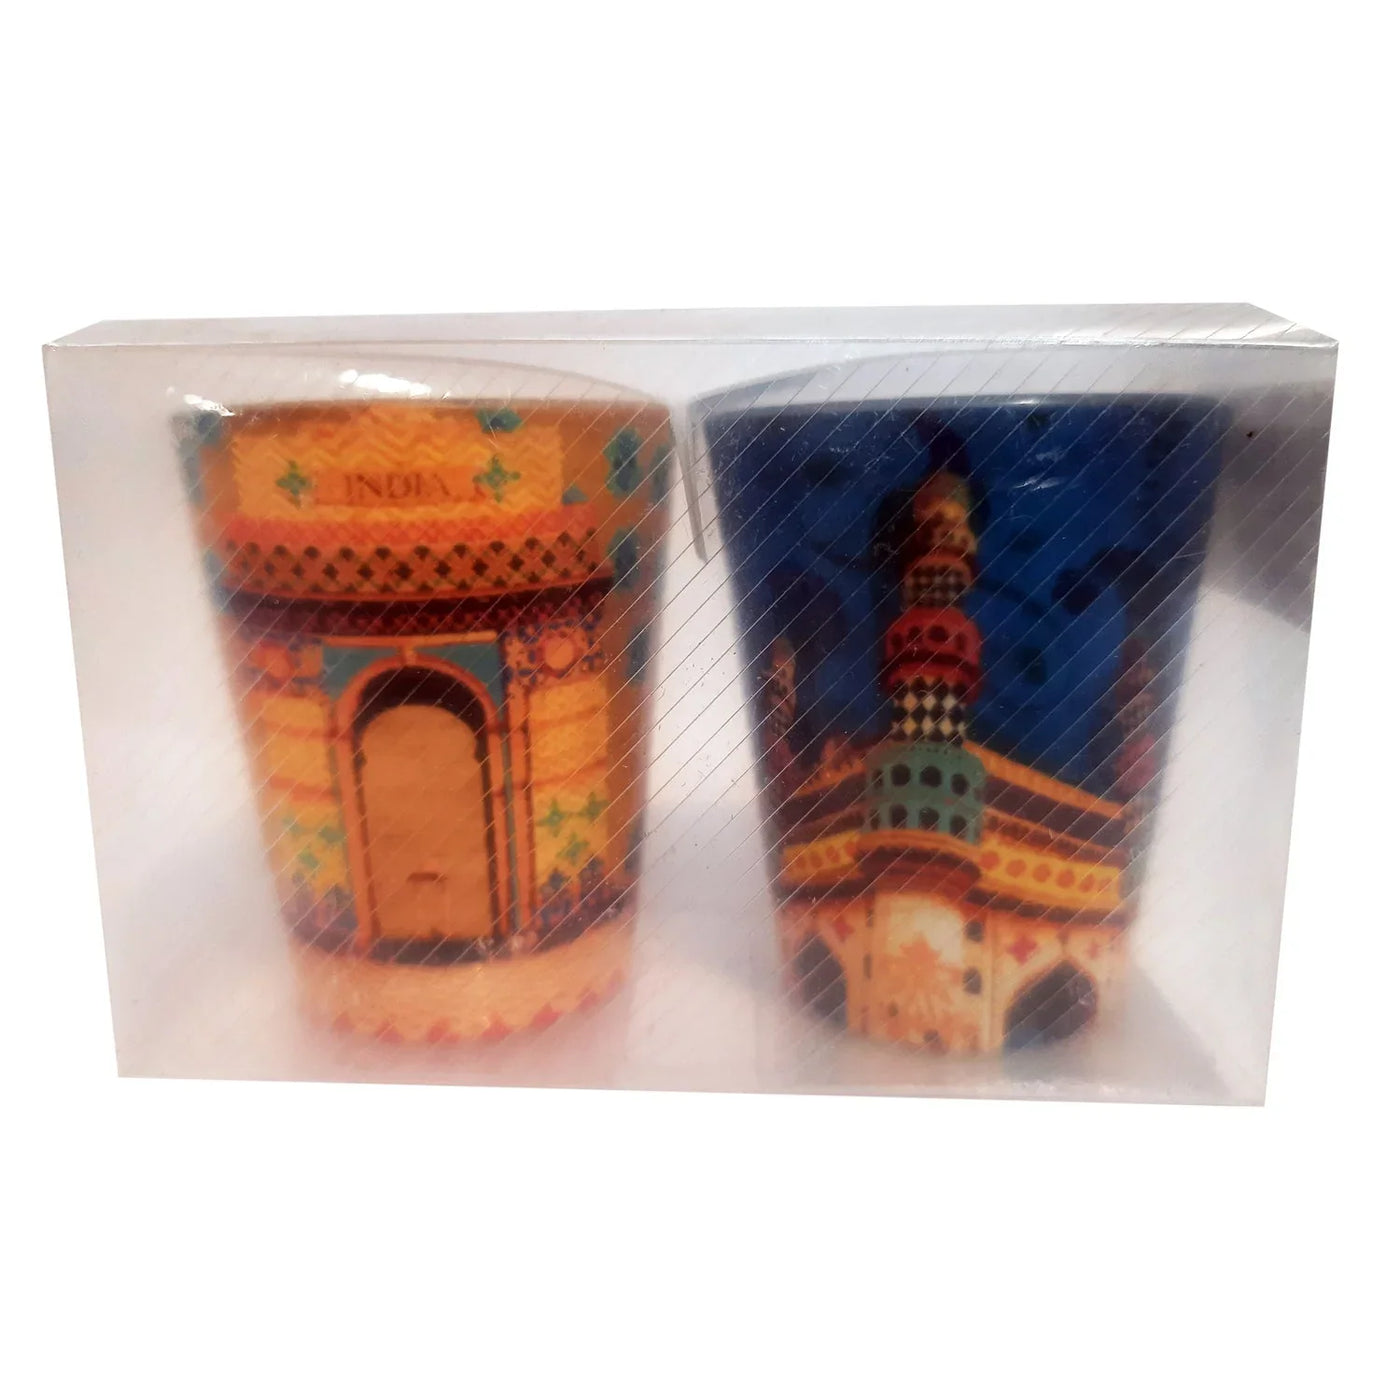 Indian Monuments Glass Set Of 2 By Trendia Decor